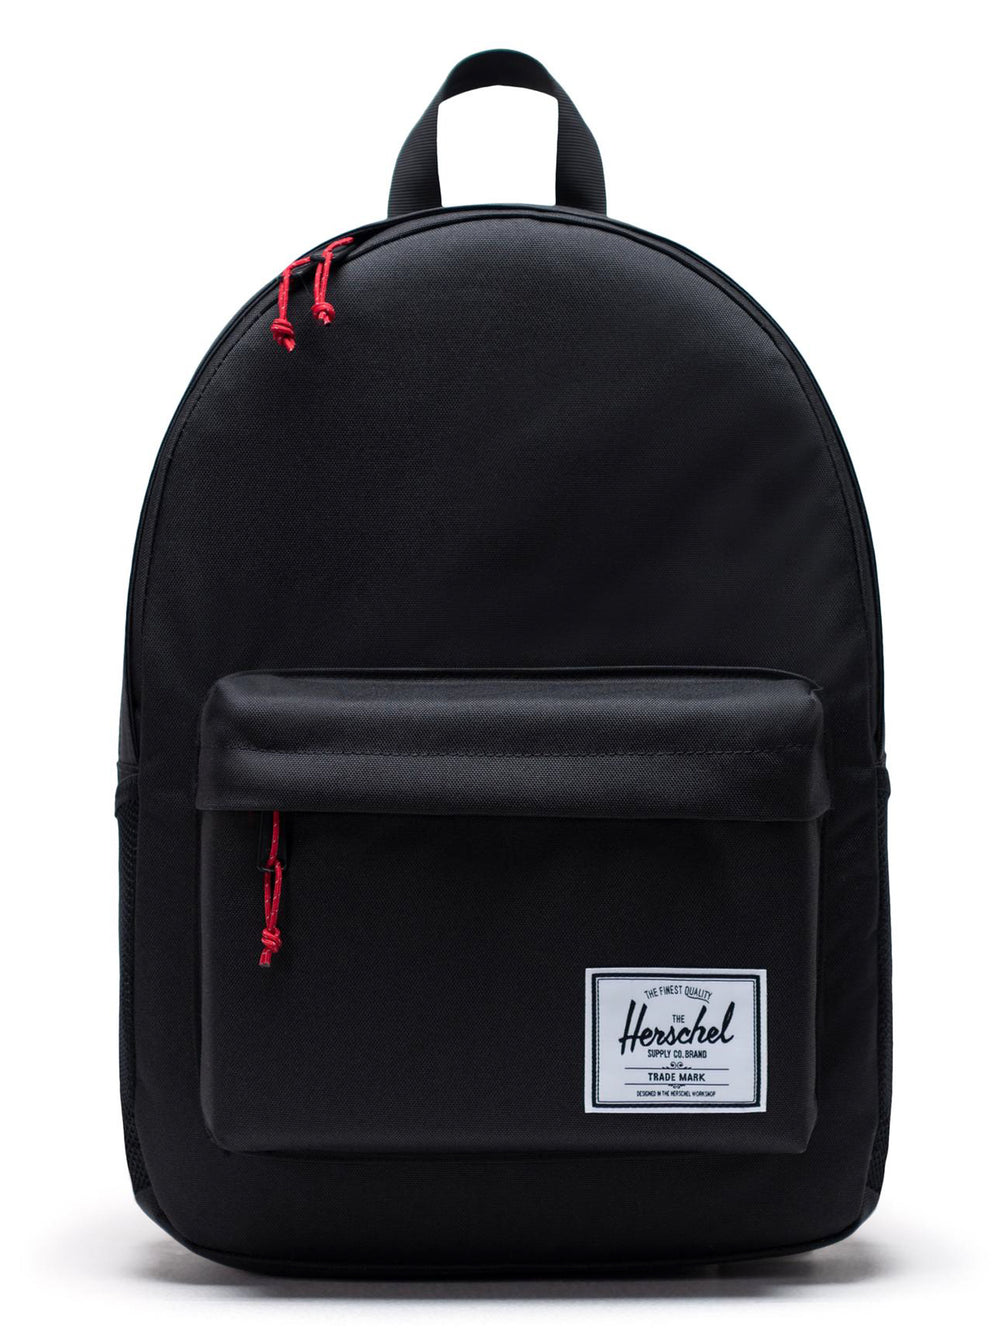 HERSCHEL SUPPLY CO. CLASSIC XL ATHLETIC 30L LOGO BACKPACK - CLEARANCE